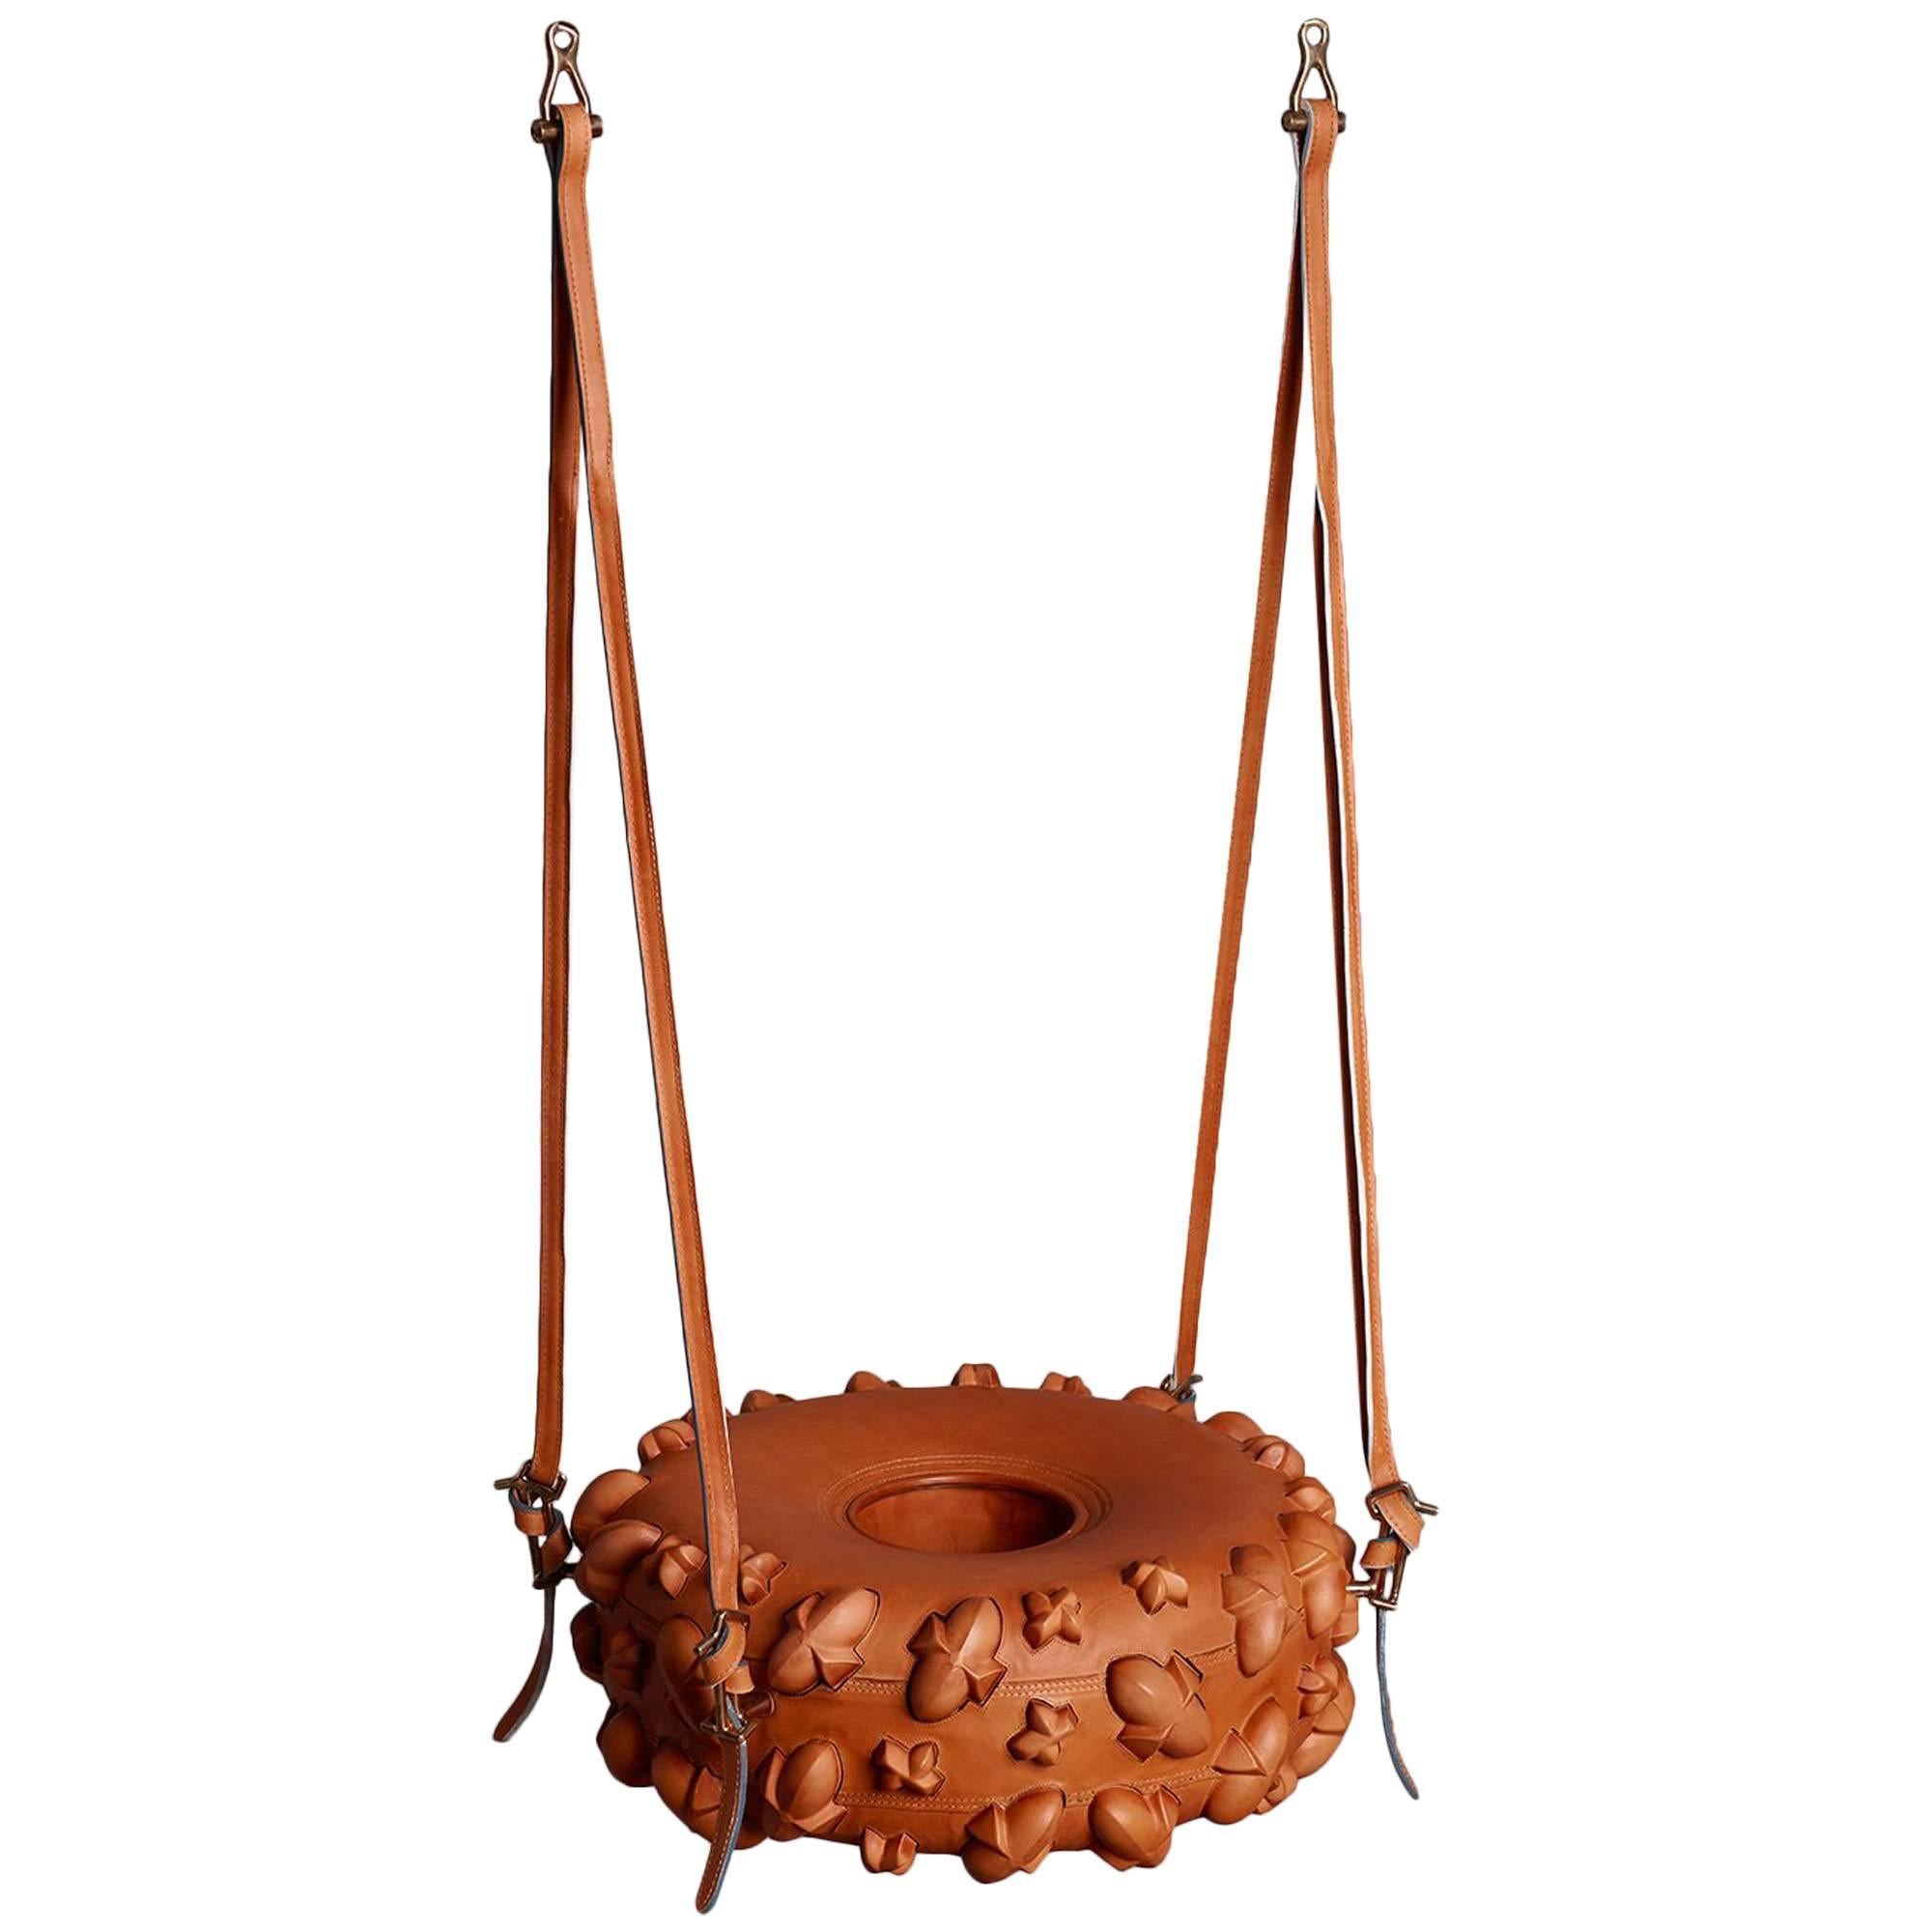 Rubicon Handmade Hanging Western Saddle Swing in Leather & Bronze by Eddy Sykes For Sale